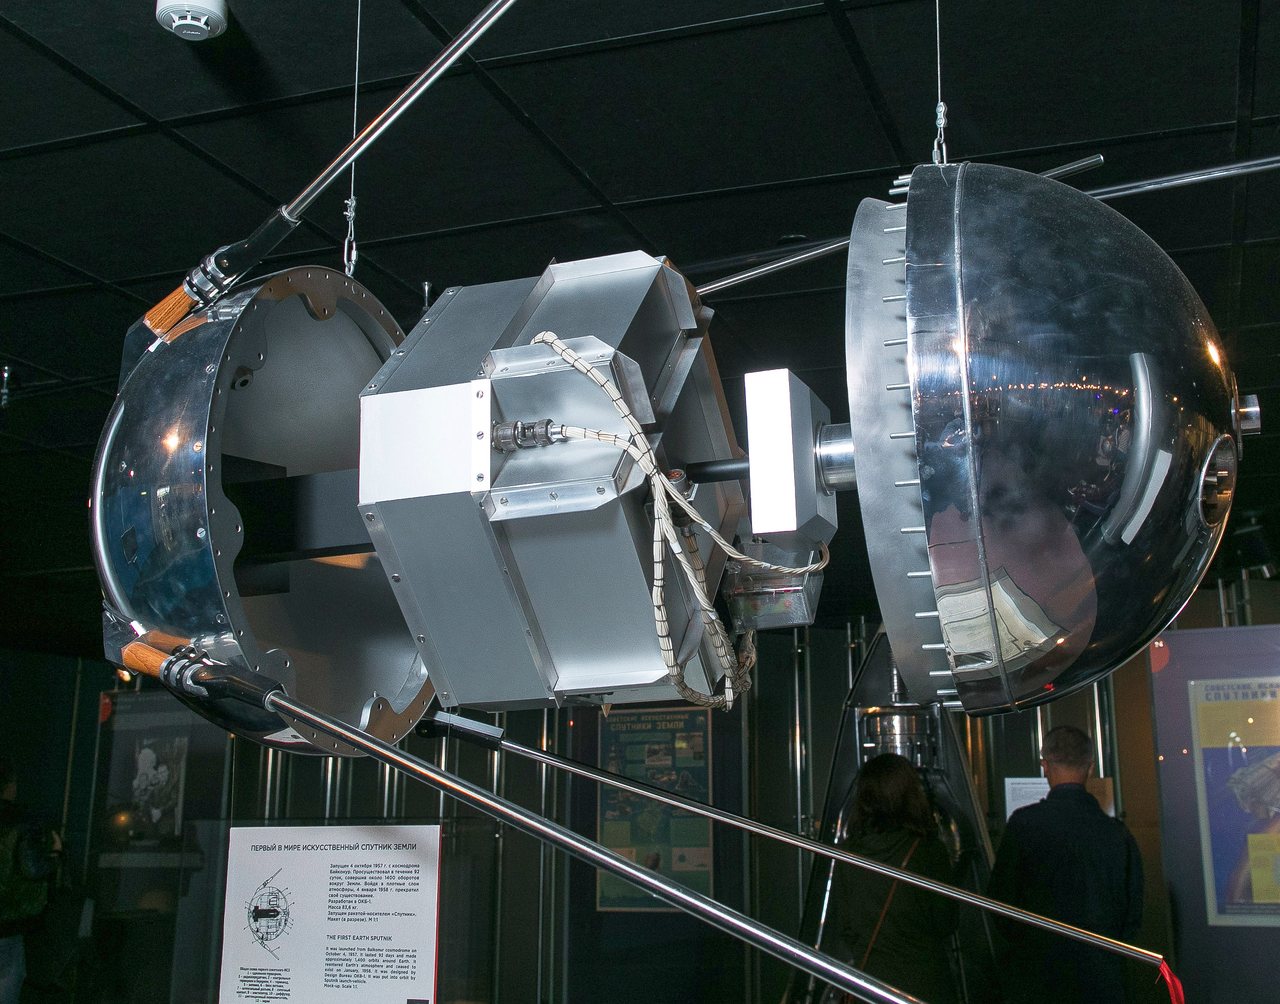 Exploded view of Sputnik-1 in a museum.